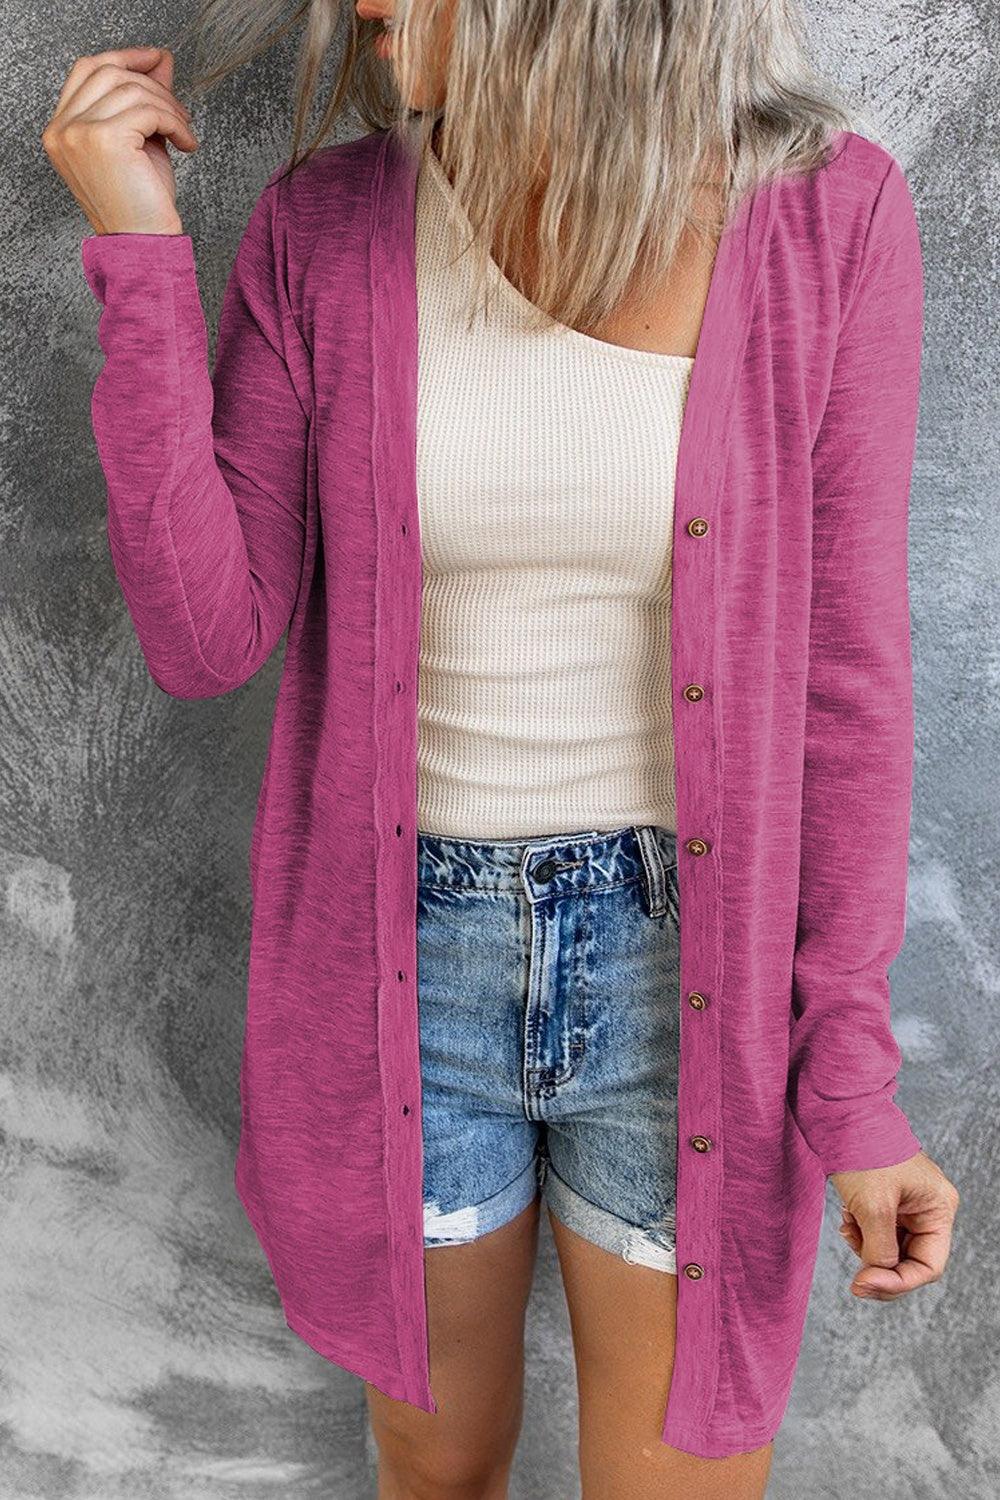 a woman wearing a pink cardigan and denim shorts